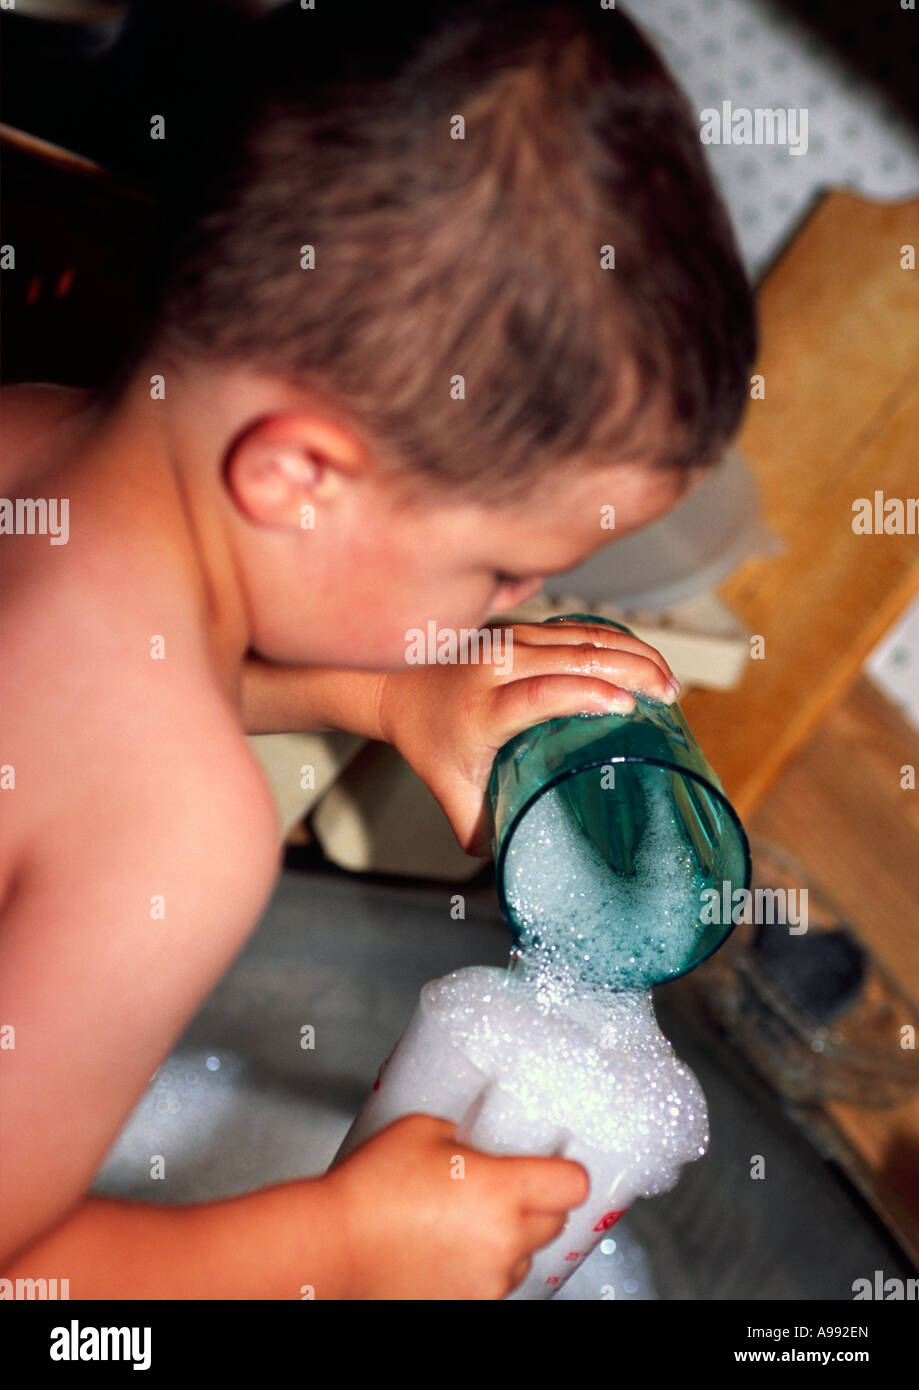 3 yr old doing dishes Stock Photo